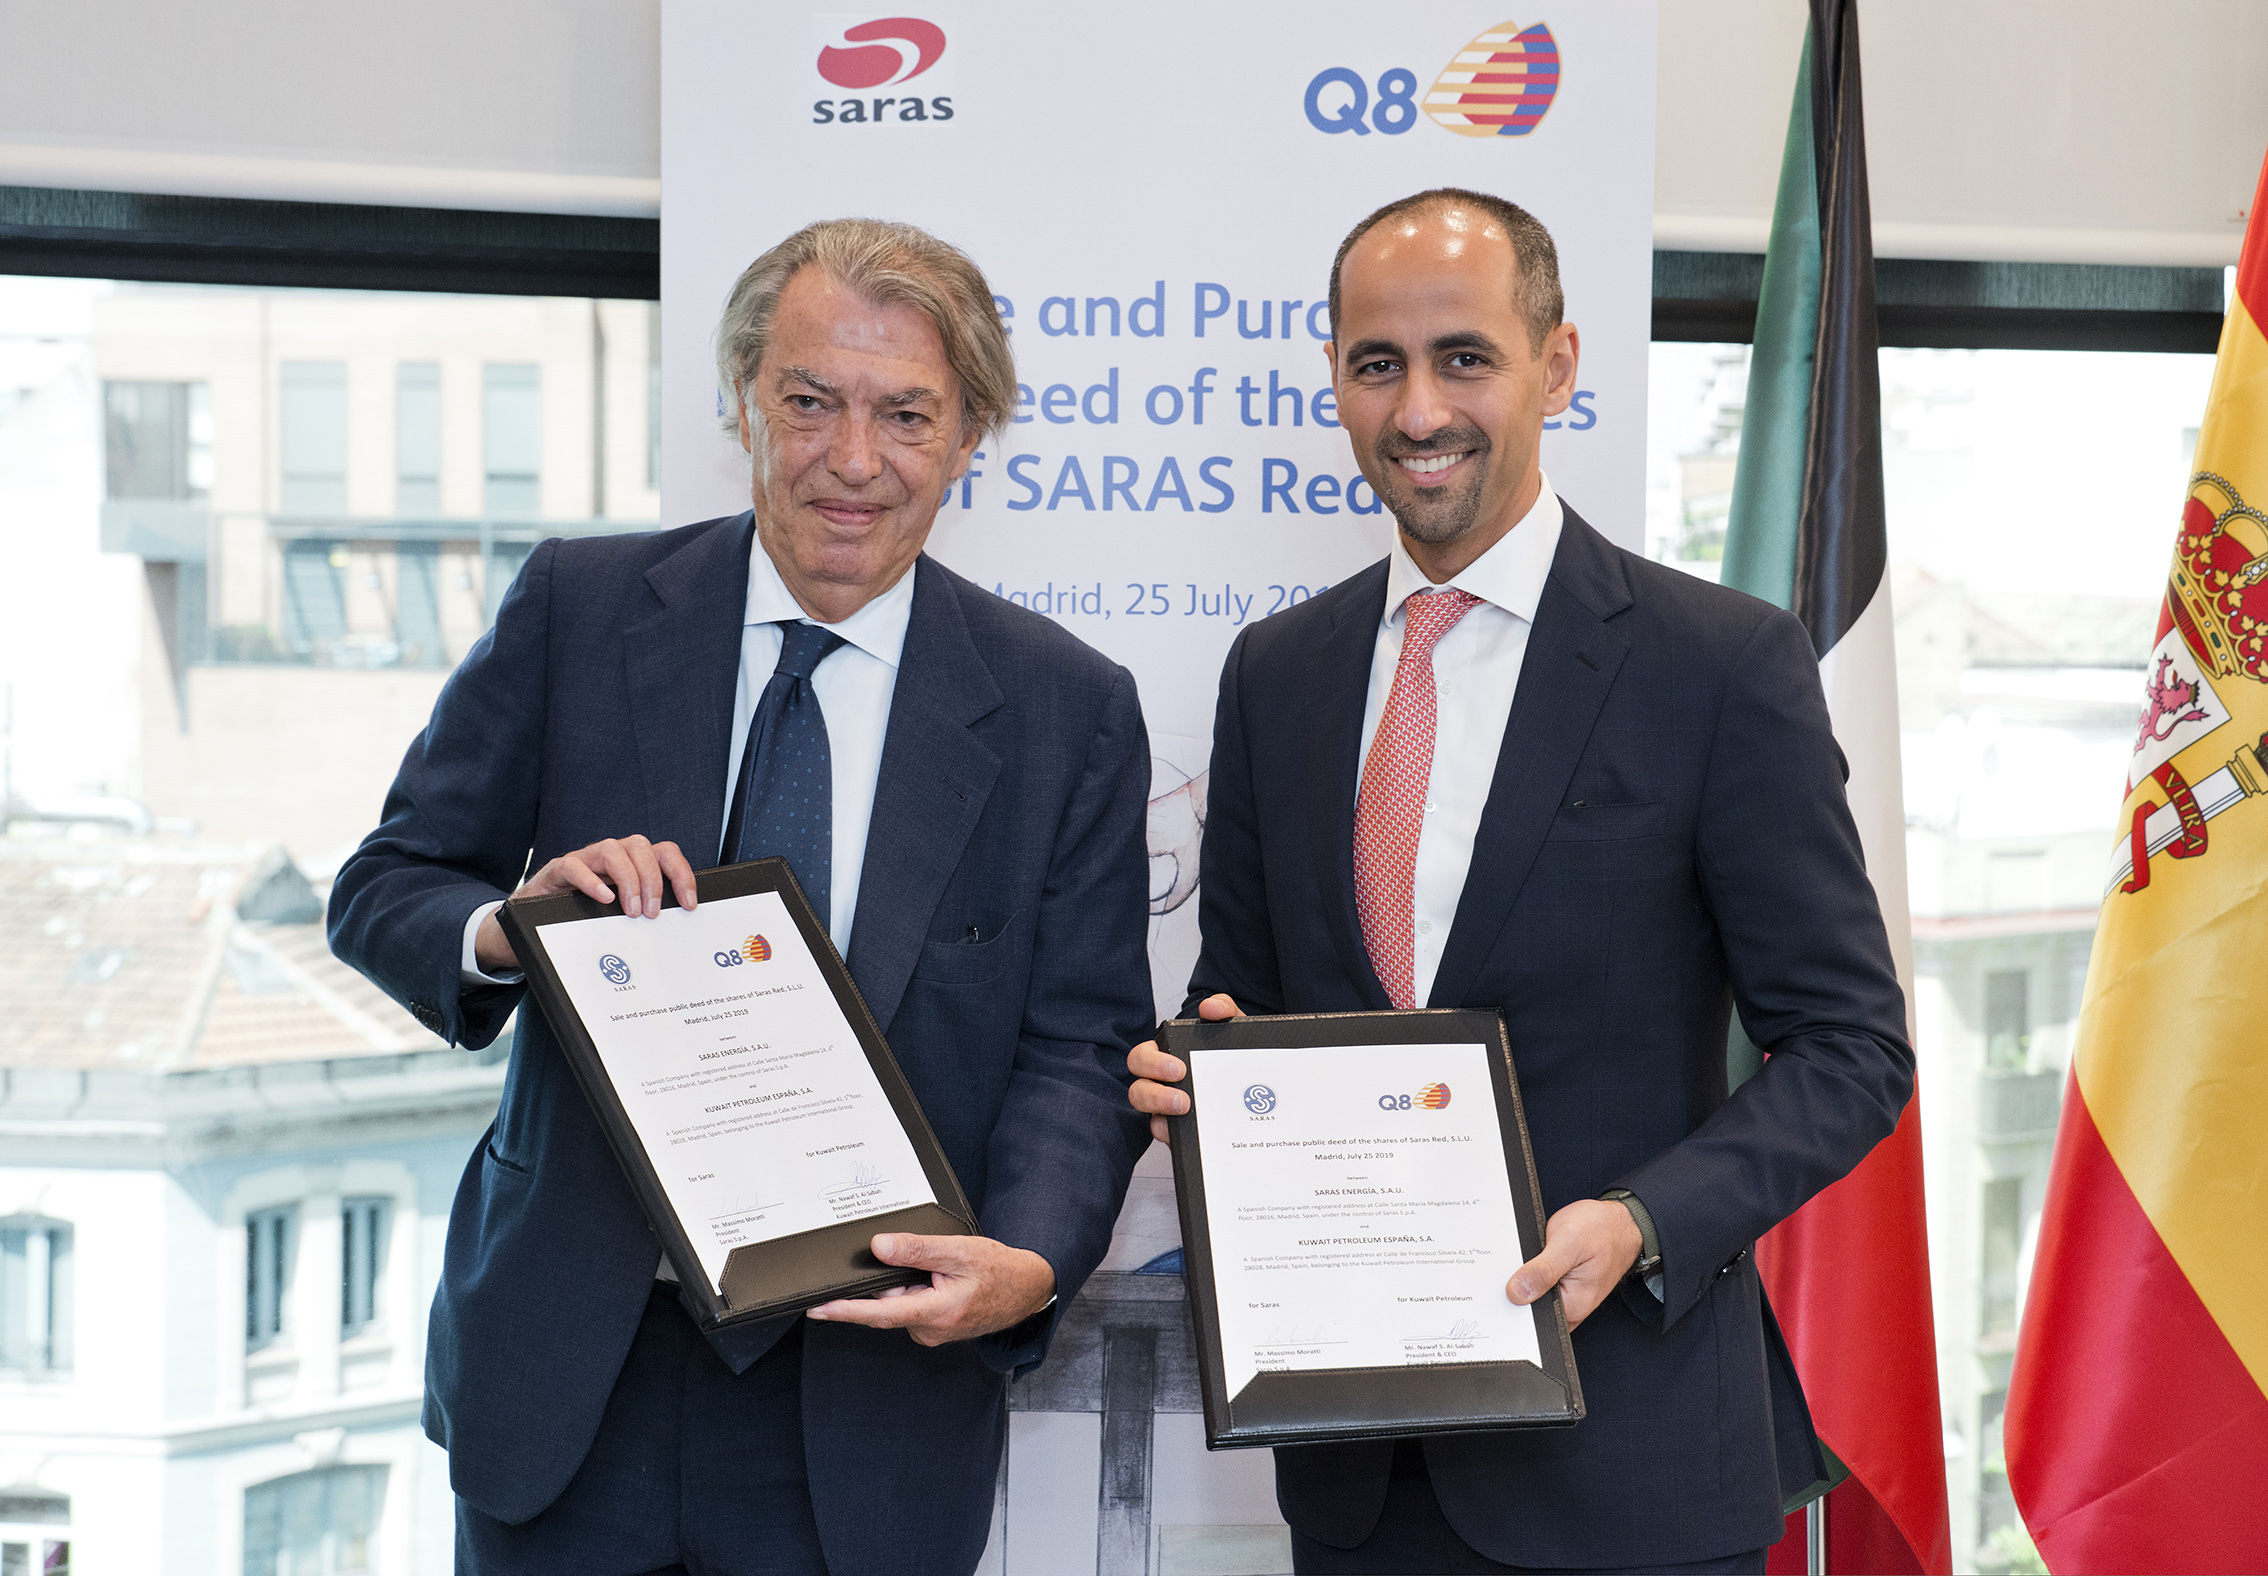 Q8 Chief Executive Officer with Saras Energia-Spain official